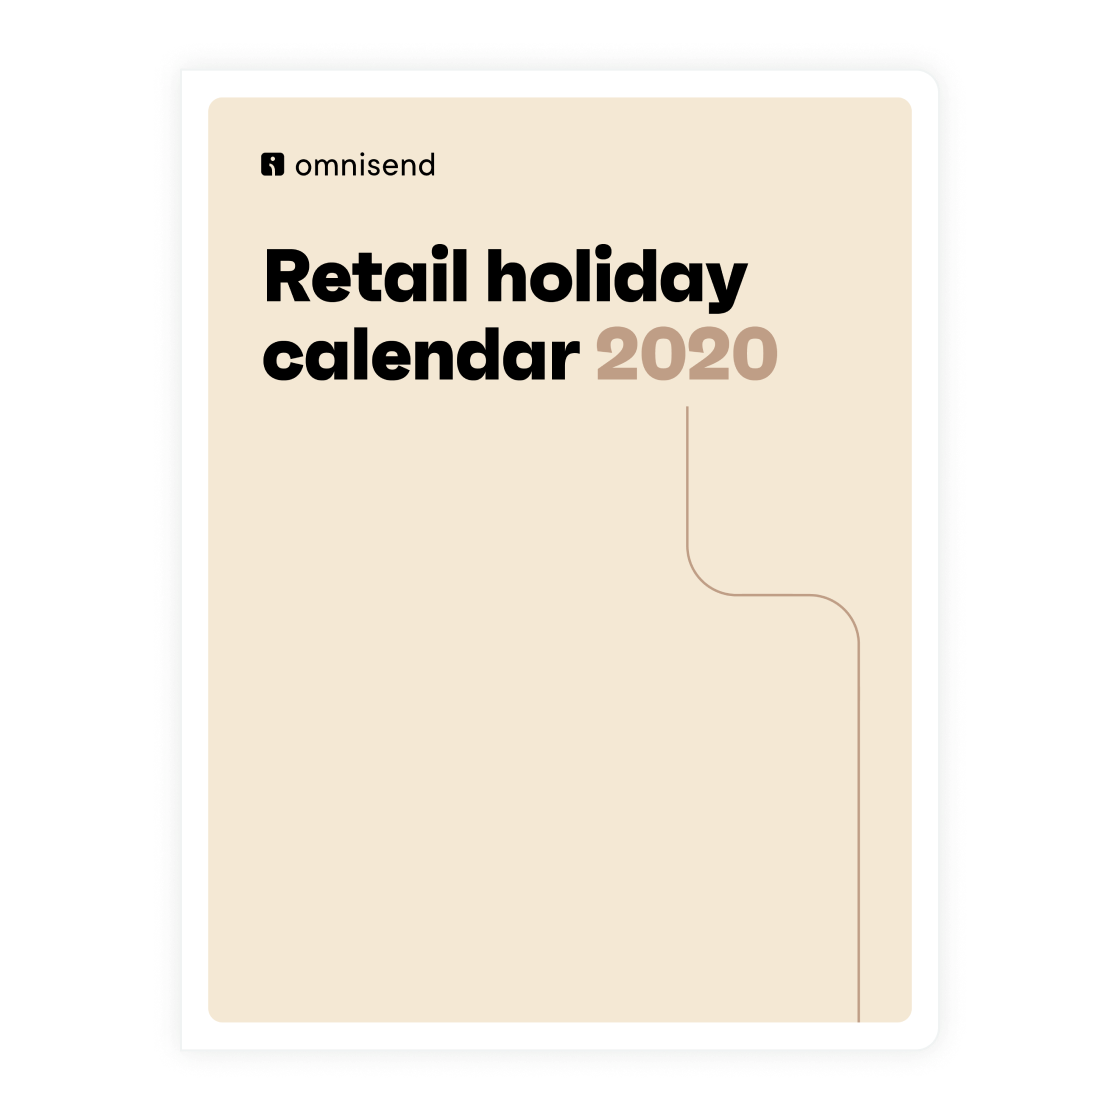 The complete US retail holiday calendar for 2020